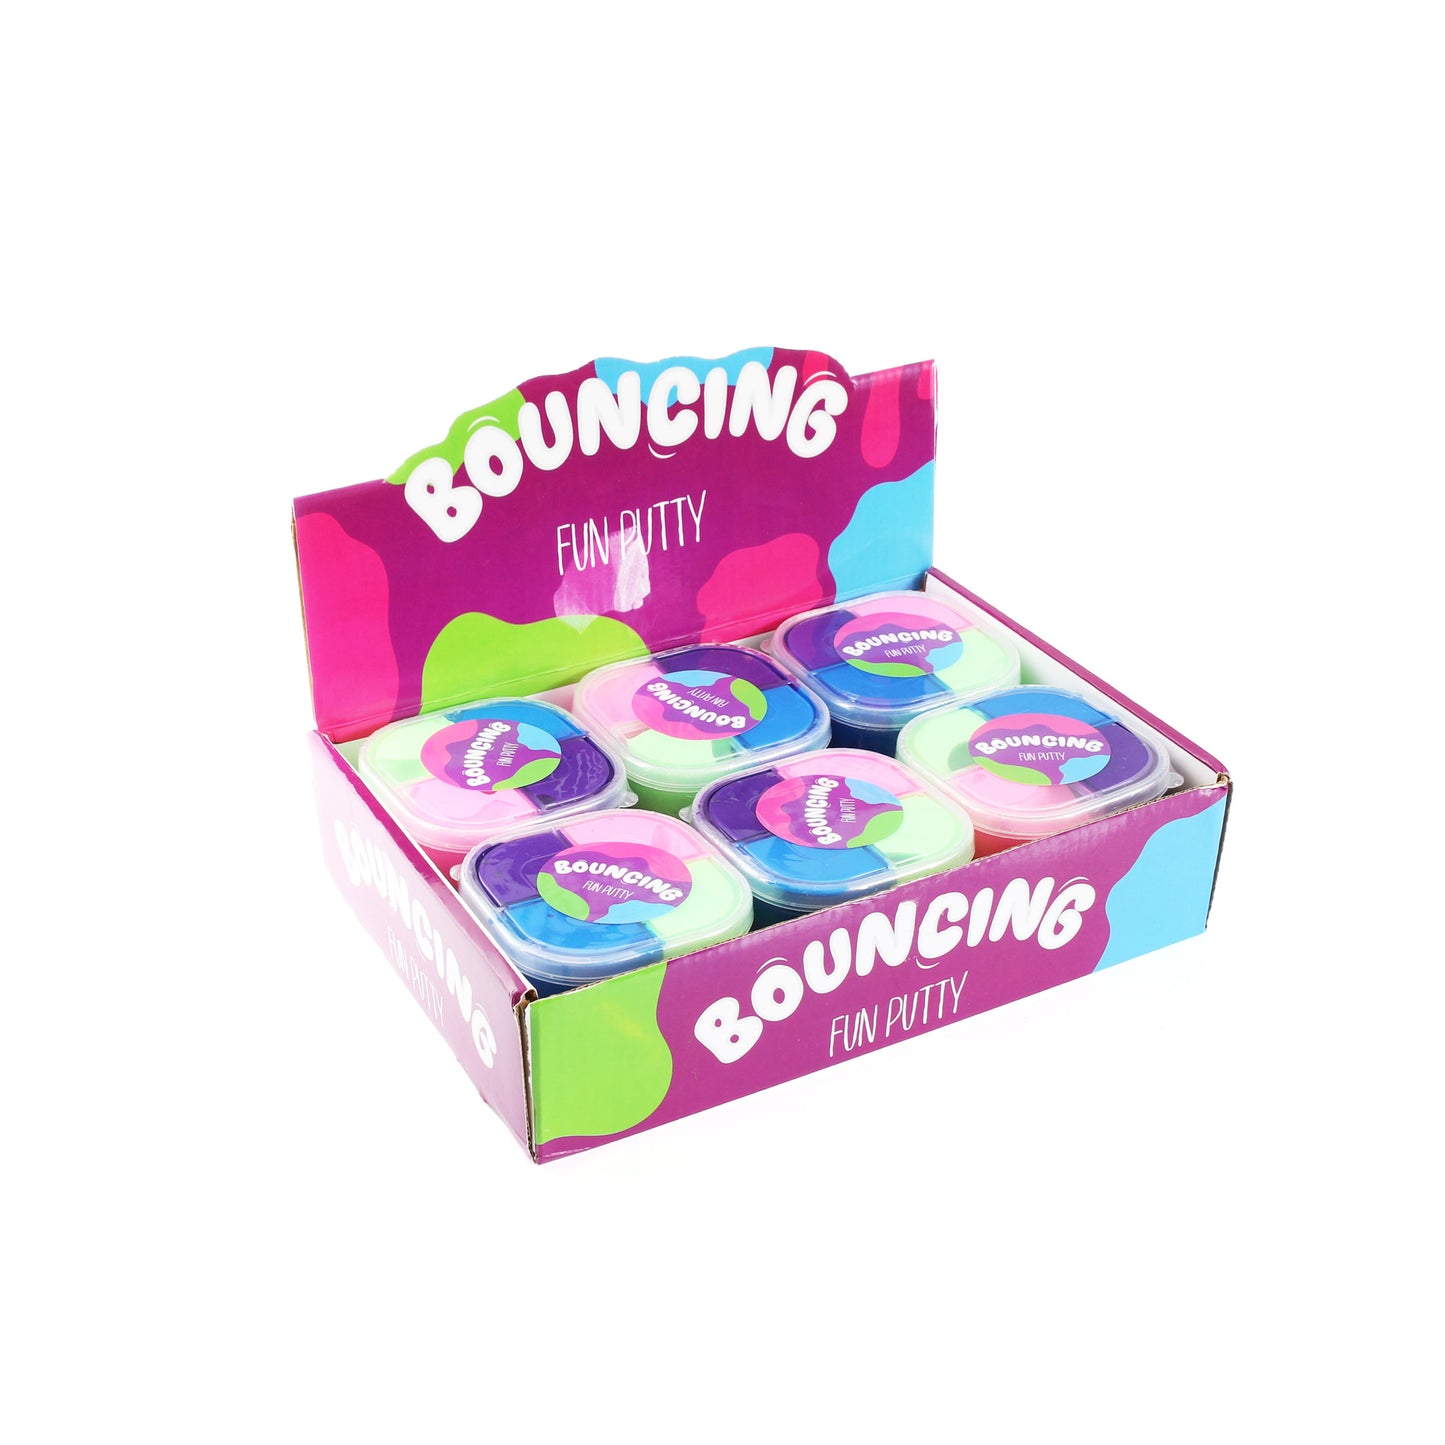 8.5x3.3cm APPROX 60g WEIGHT TUB OF 4 TONE COLOUR BOUNCING PUTTY